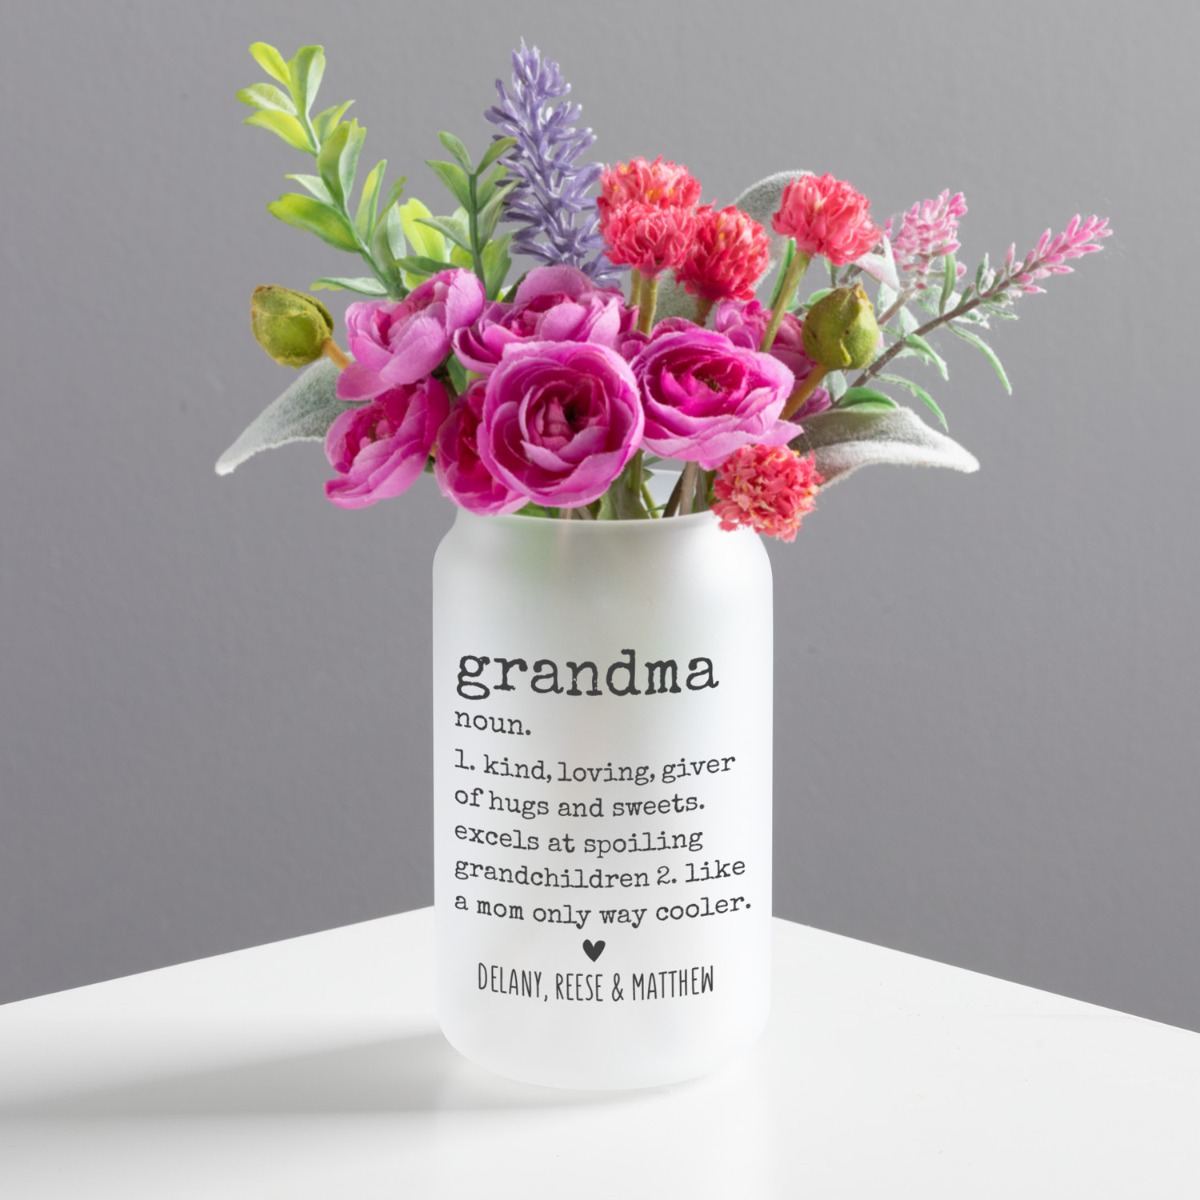 Grandma Definition Personalized Frosted Glass Flower Vase